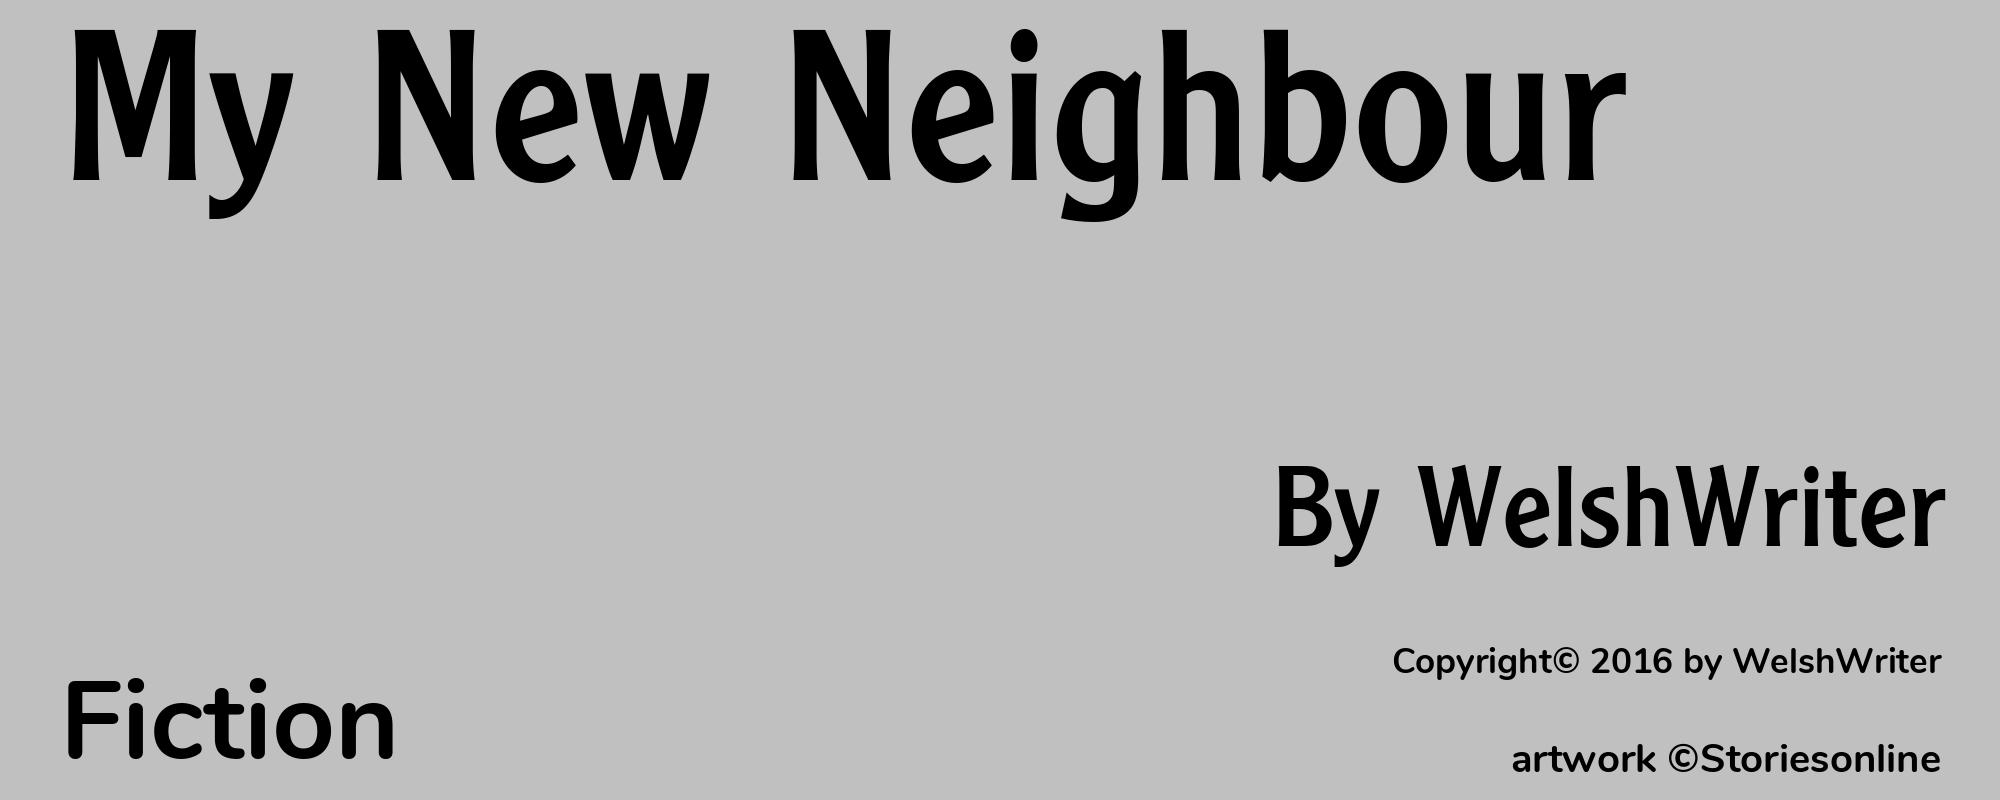 My New Neighbour - Cover